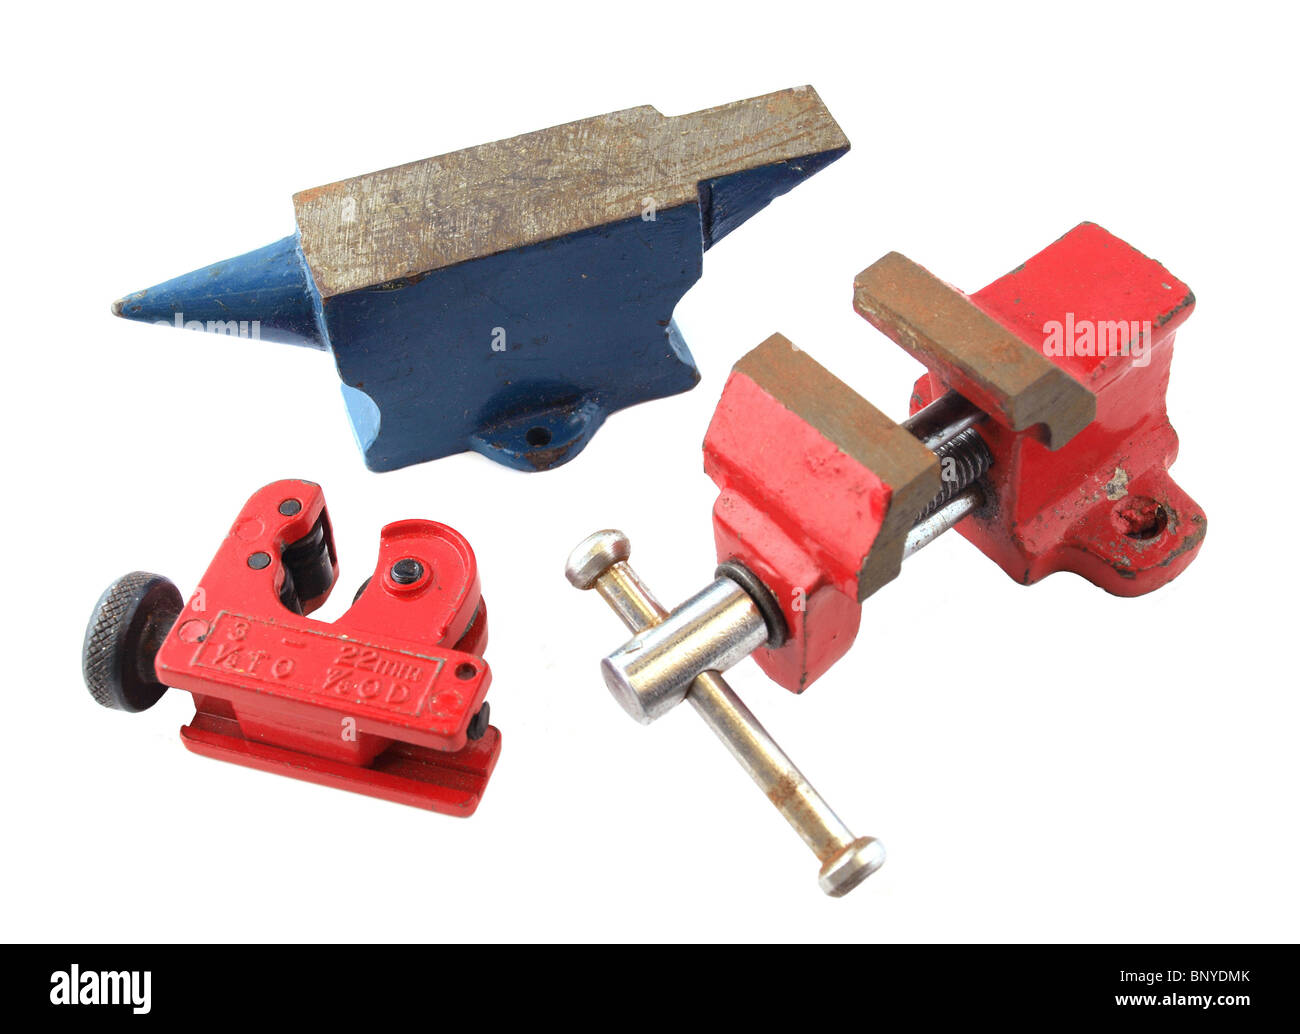 Assotred tools on an isolated white background. Stock Photo